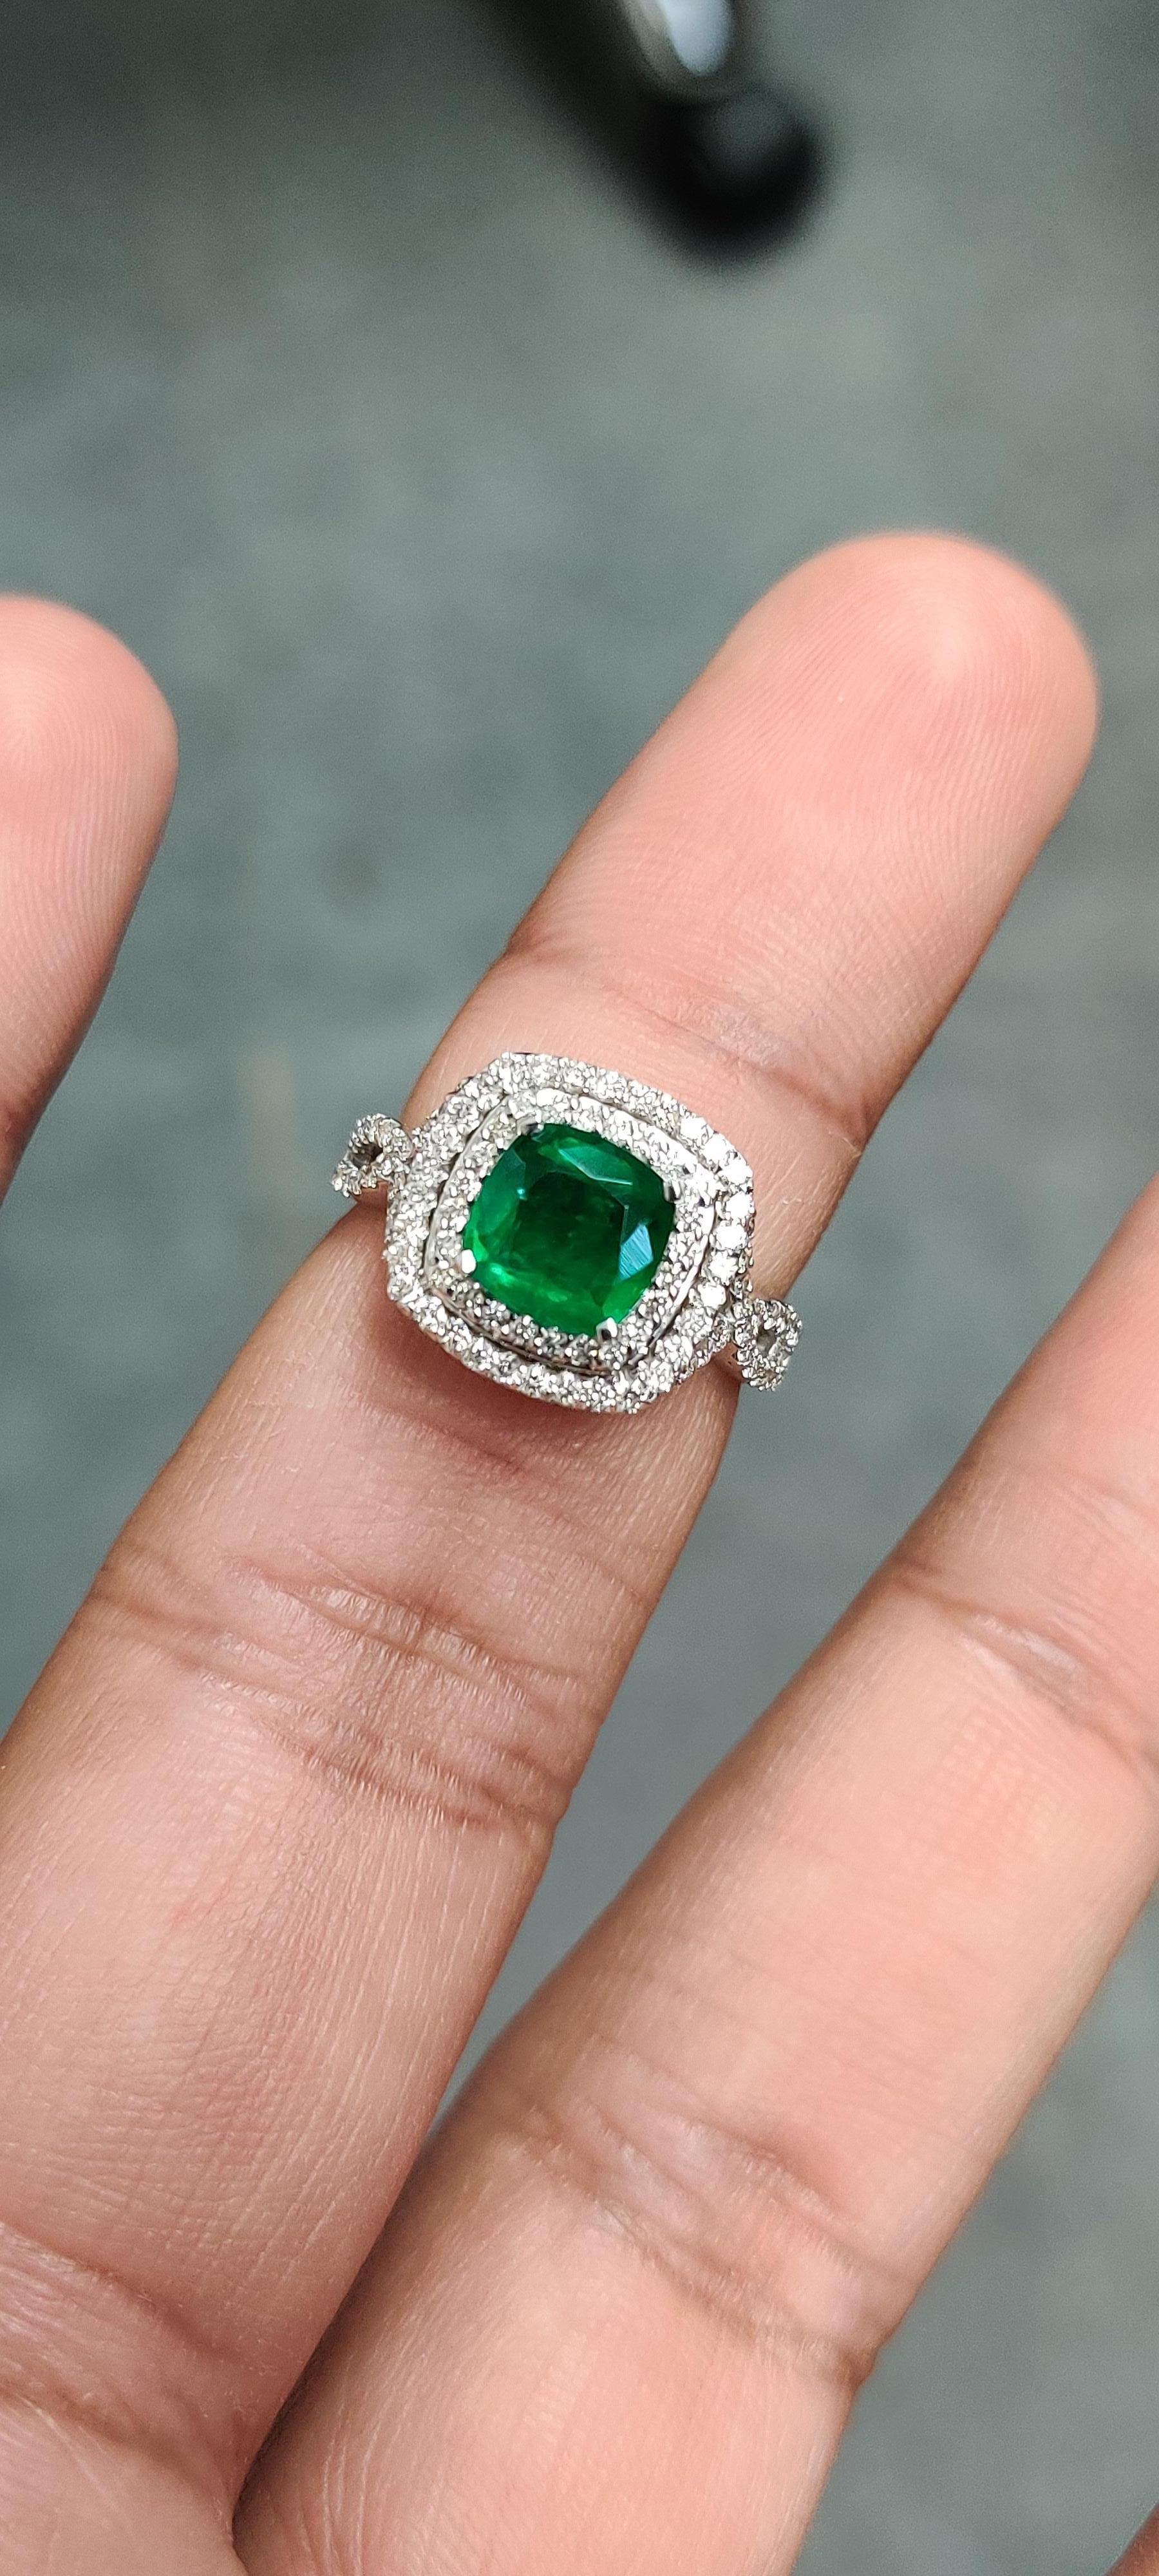 Women's 1.26 Carat Emerald with Halo Diamonds 18K White Gold Ring For Sale